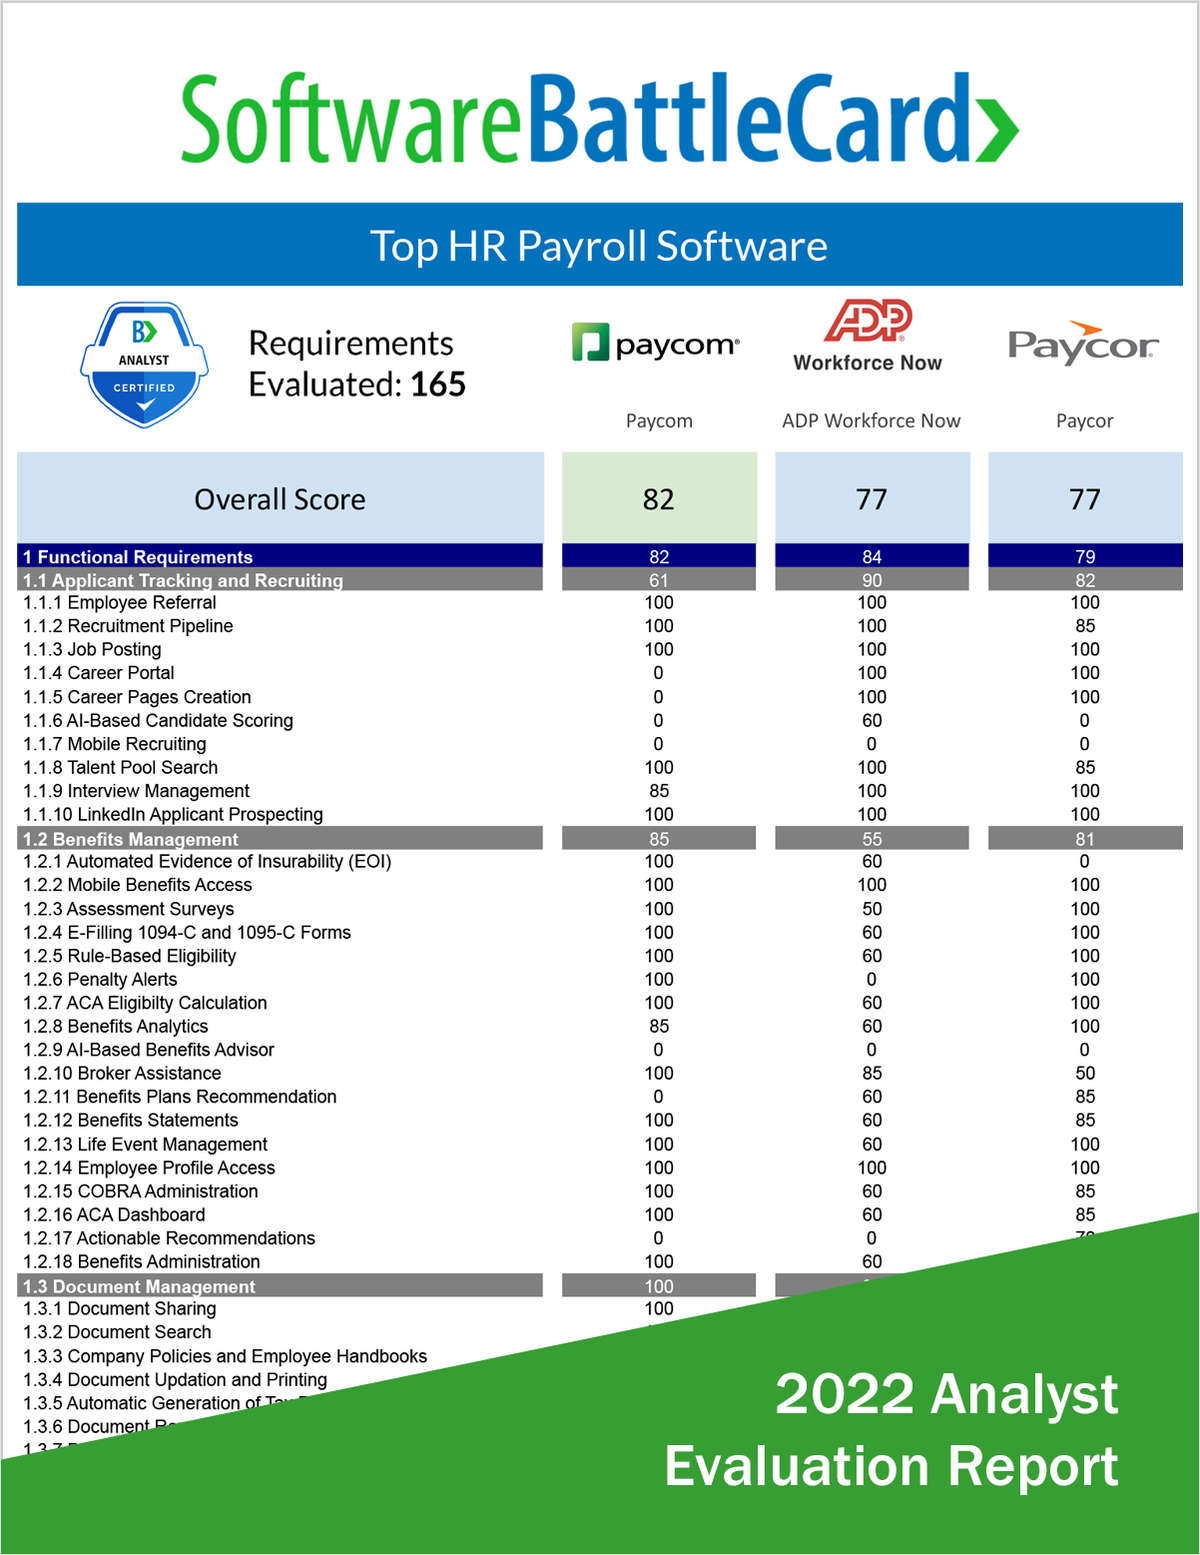 Top HR Payroll Software--Paycom vs. ADP Workforce Now vs. Paycor